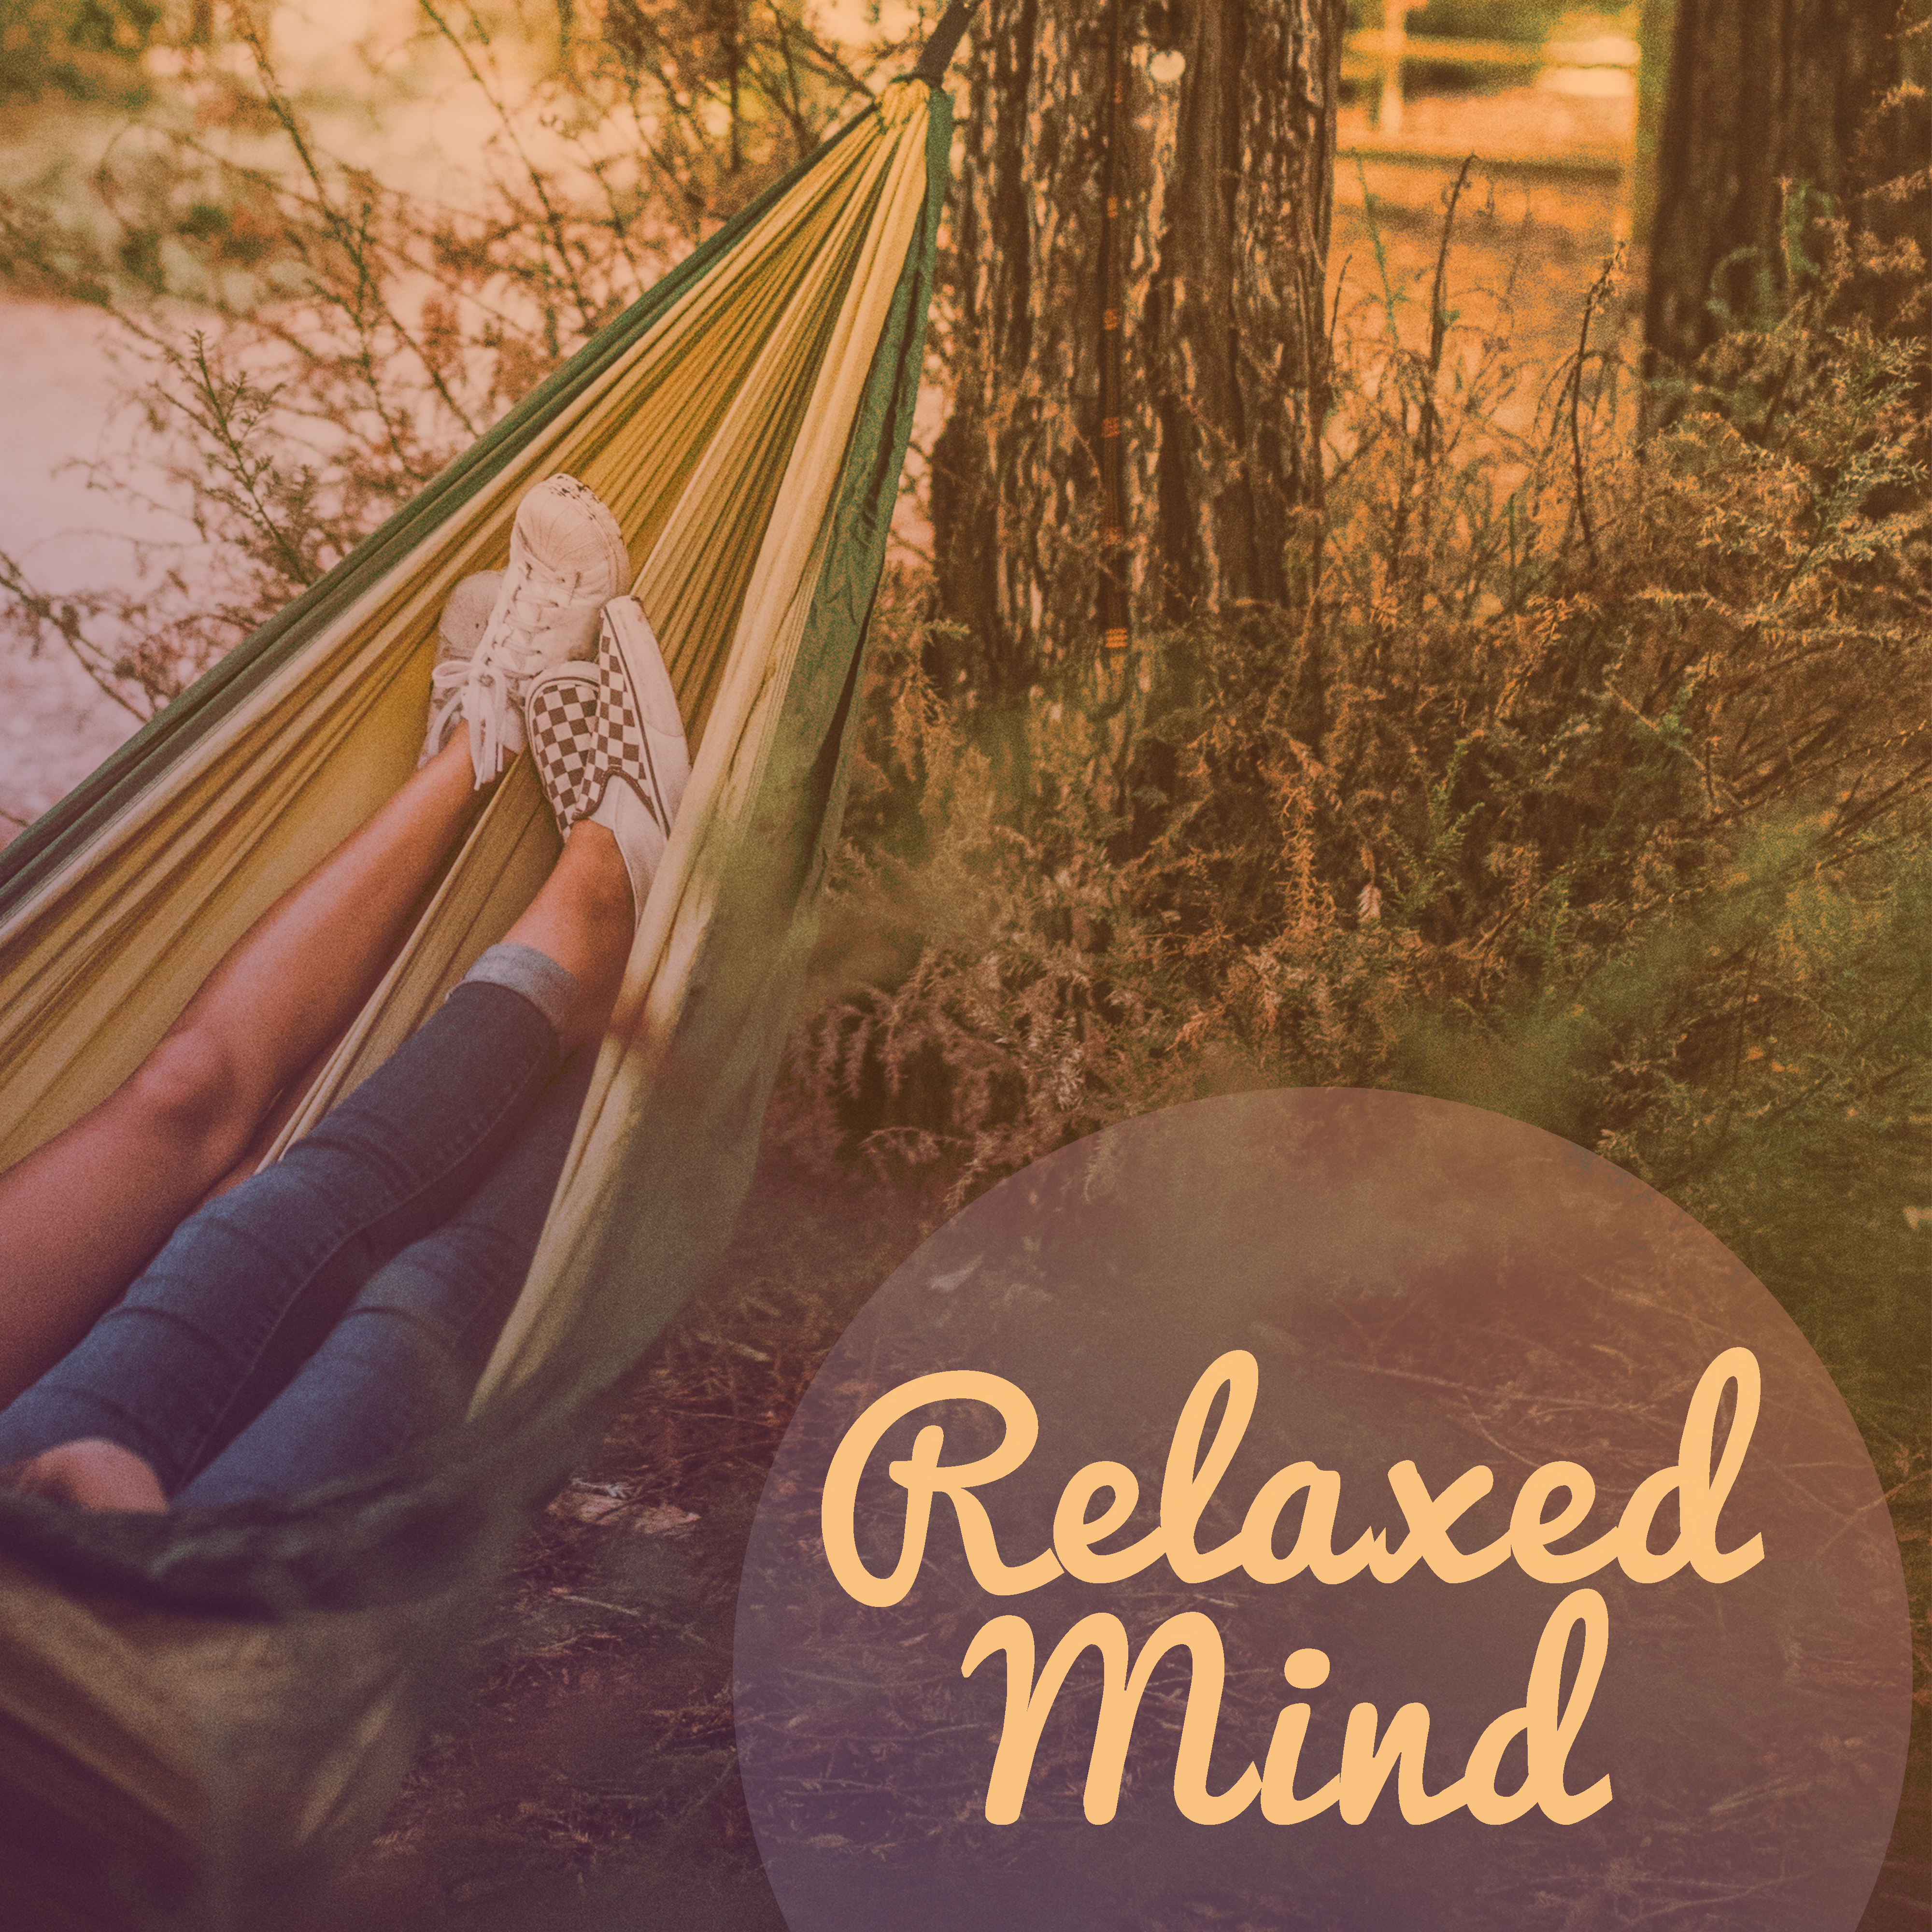 Relaxed Mind  Anti Stress Sounds, Pure Chill, Ambient Music, Inner Harmony, Zen